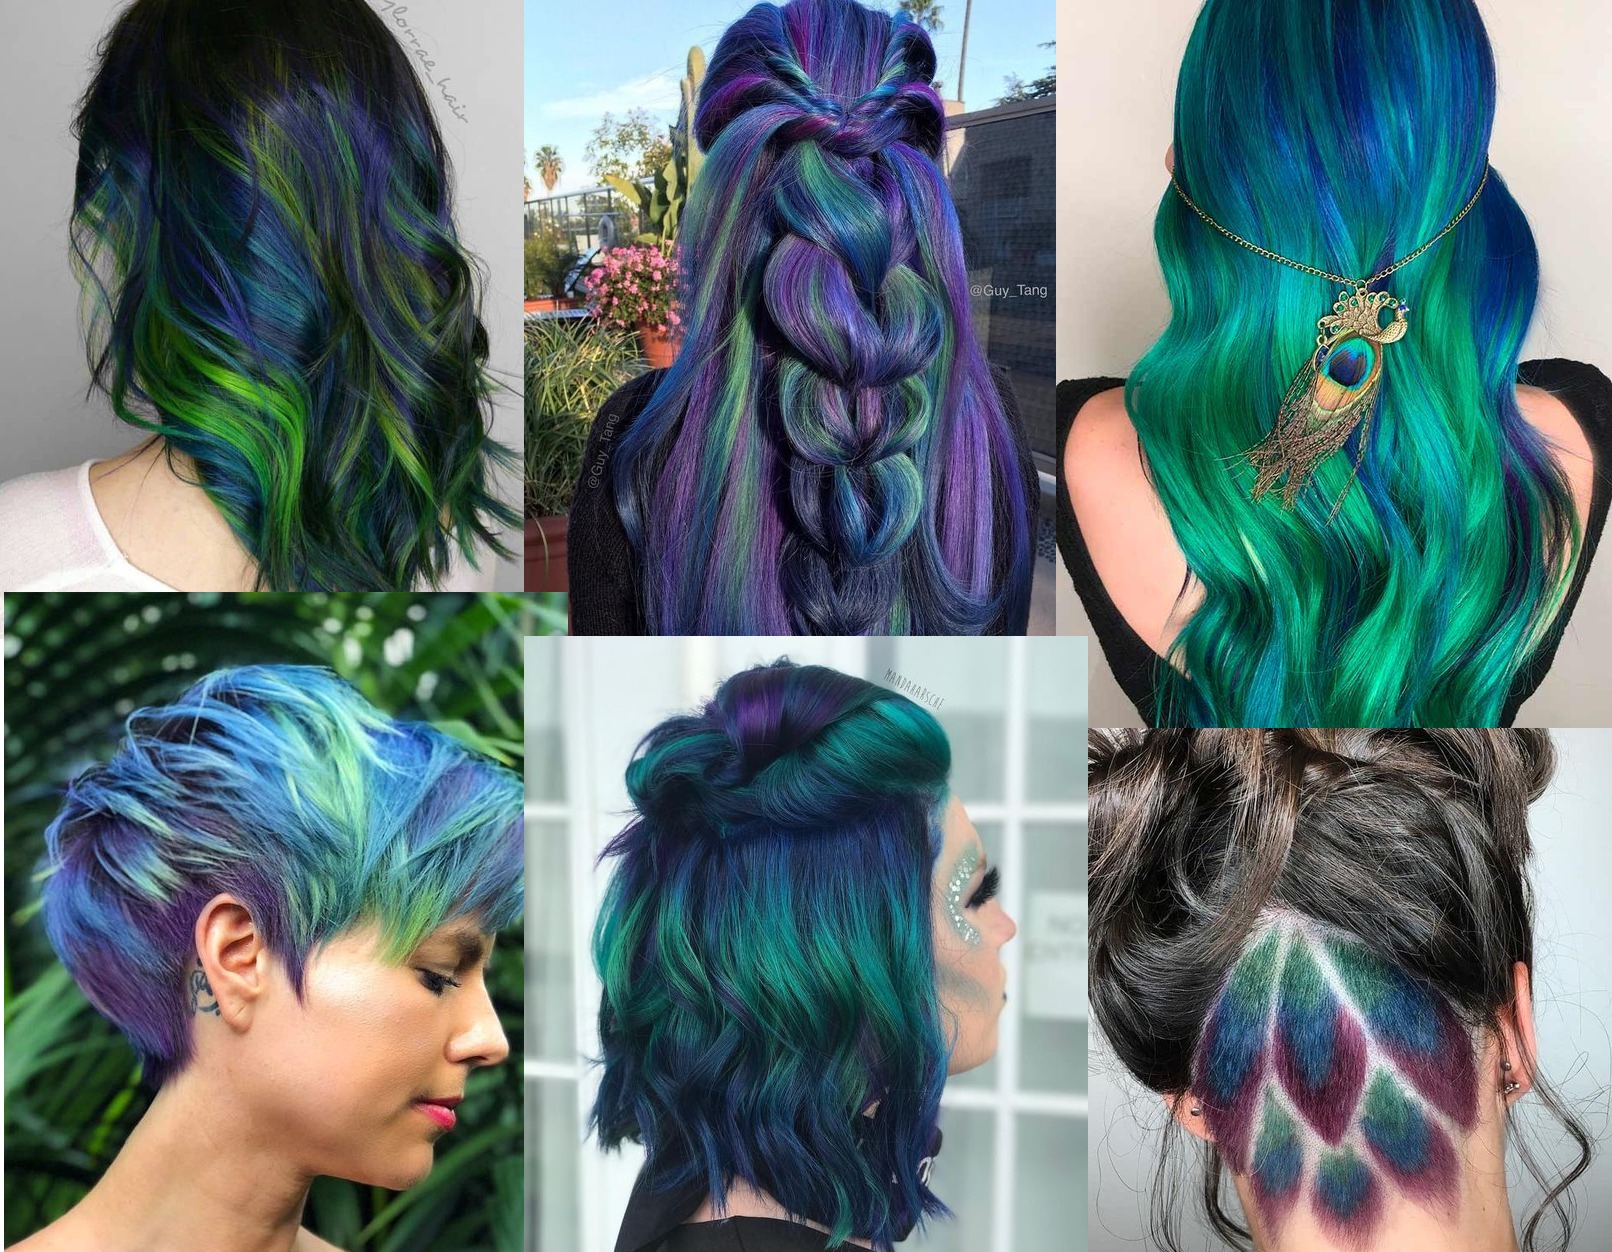 This peacock hair colour trend is going viral!